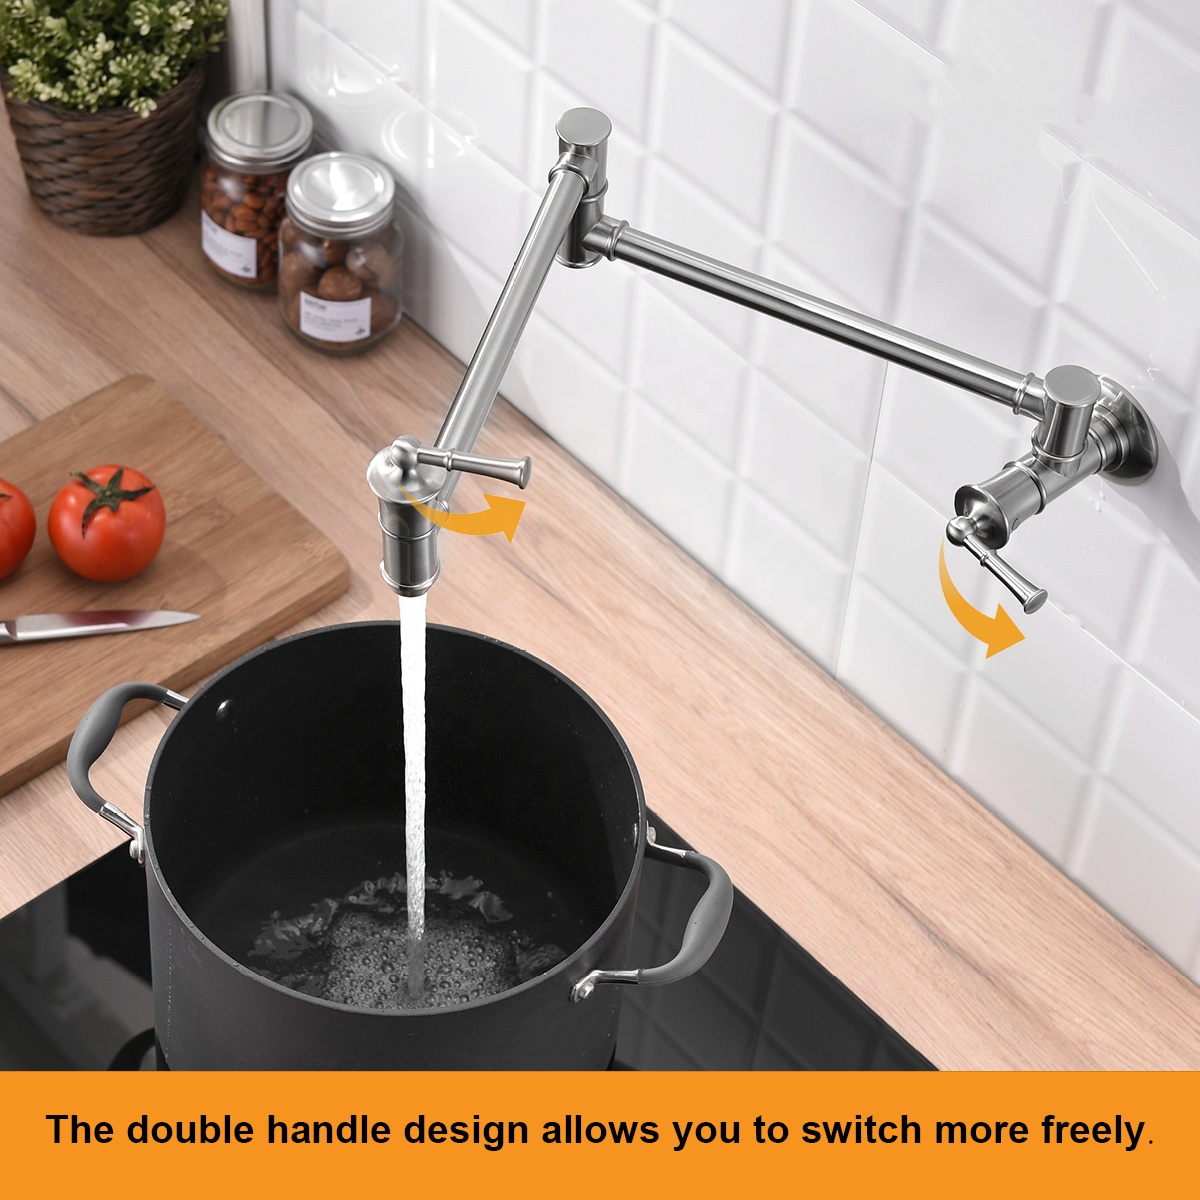 Folding Sink Faucet Kitchen Faucets Canada Folding Down Kitchen Faucet In Brushed Nickel